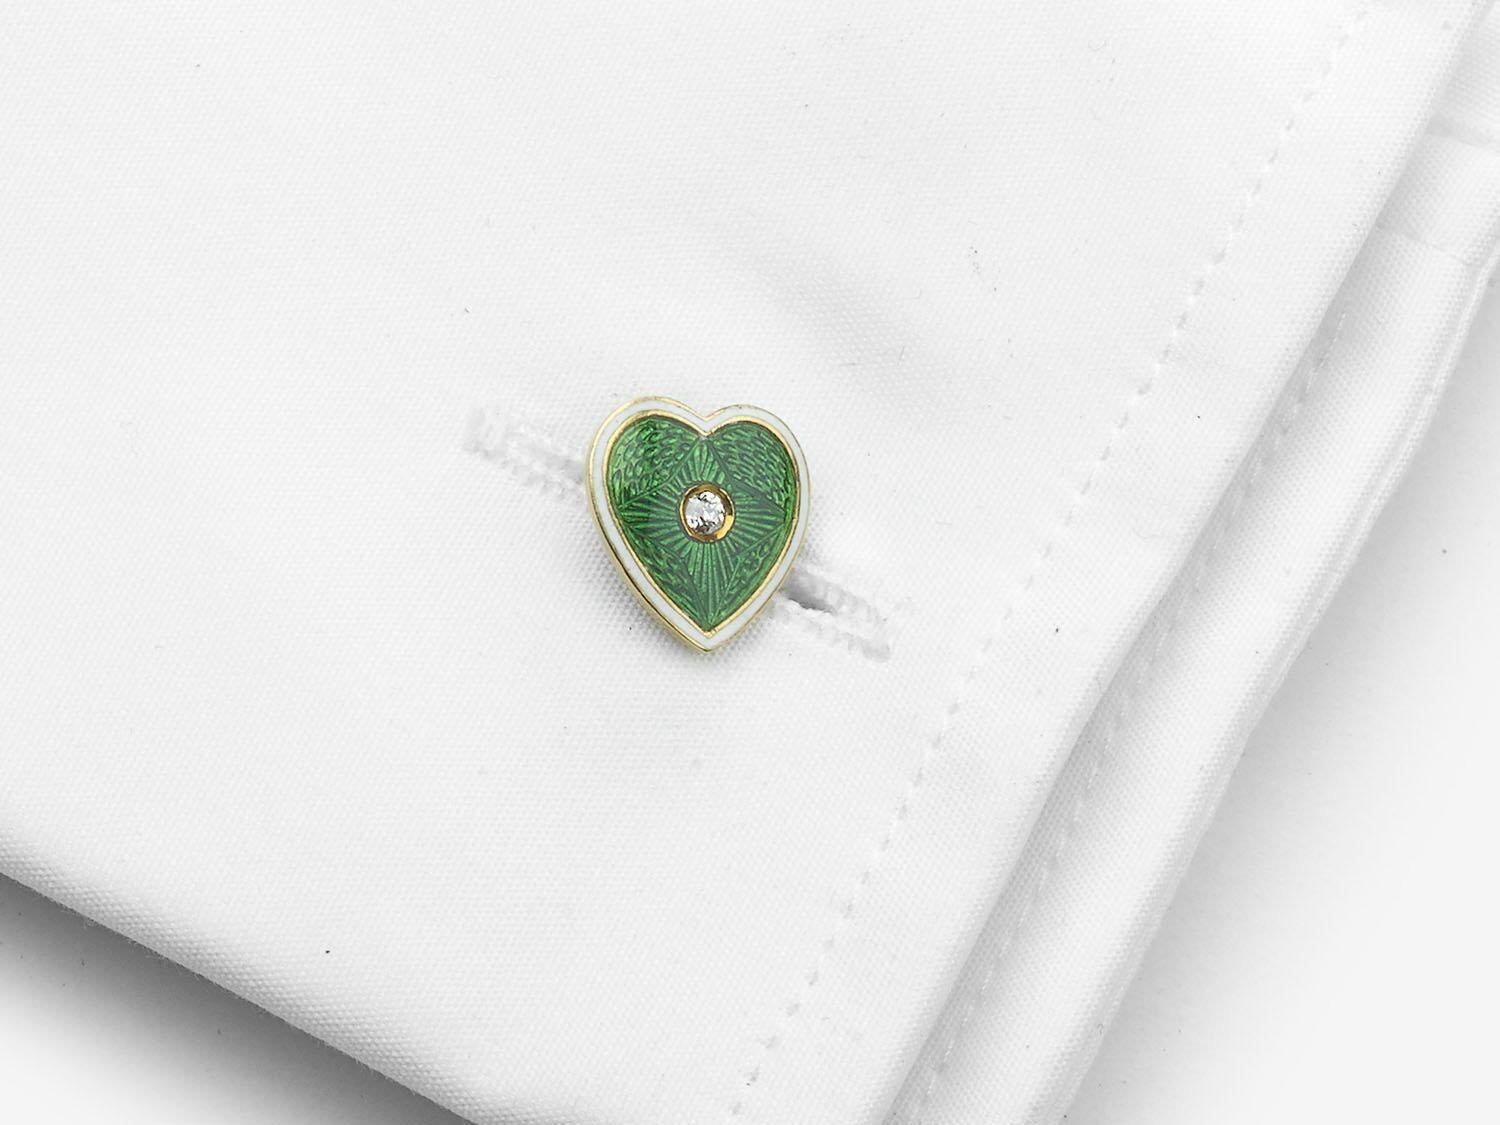 A pair of antique, green and white enamel heart shape cufflinks, with old-cut diamonds set in the centre, with surrounding green, guilloché enamel, with white enamel borders, mounted in 18ct gold, stamped 18, with chain fittings, with inventory